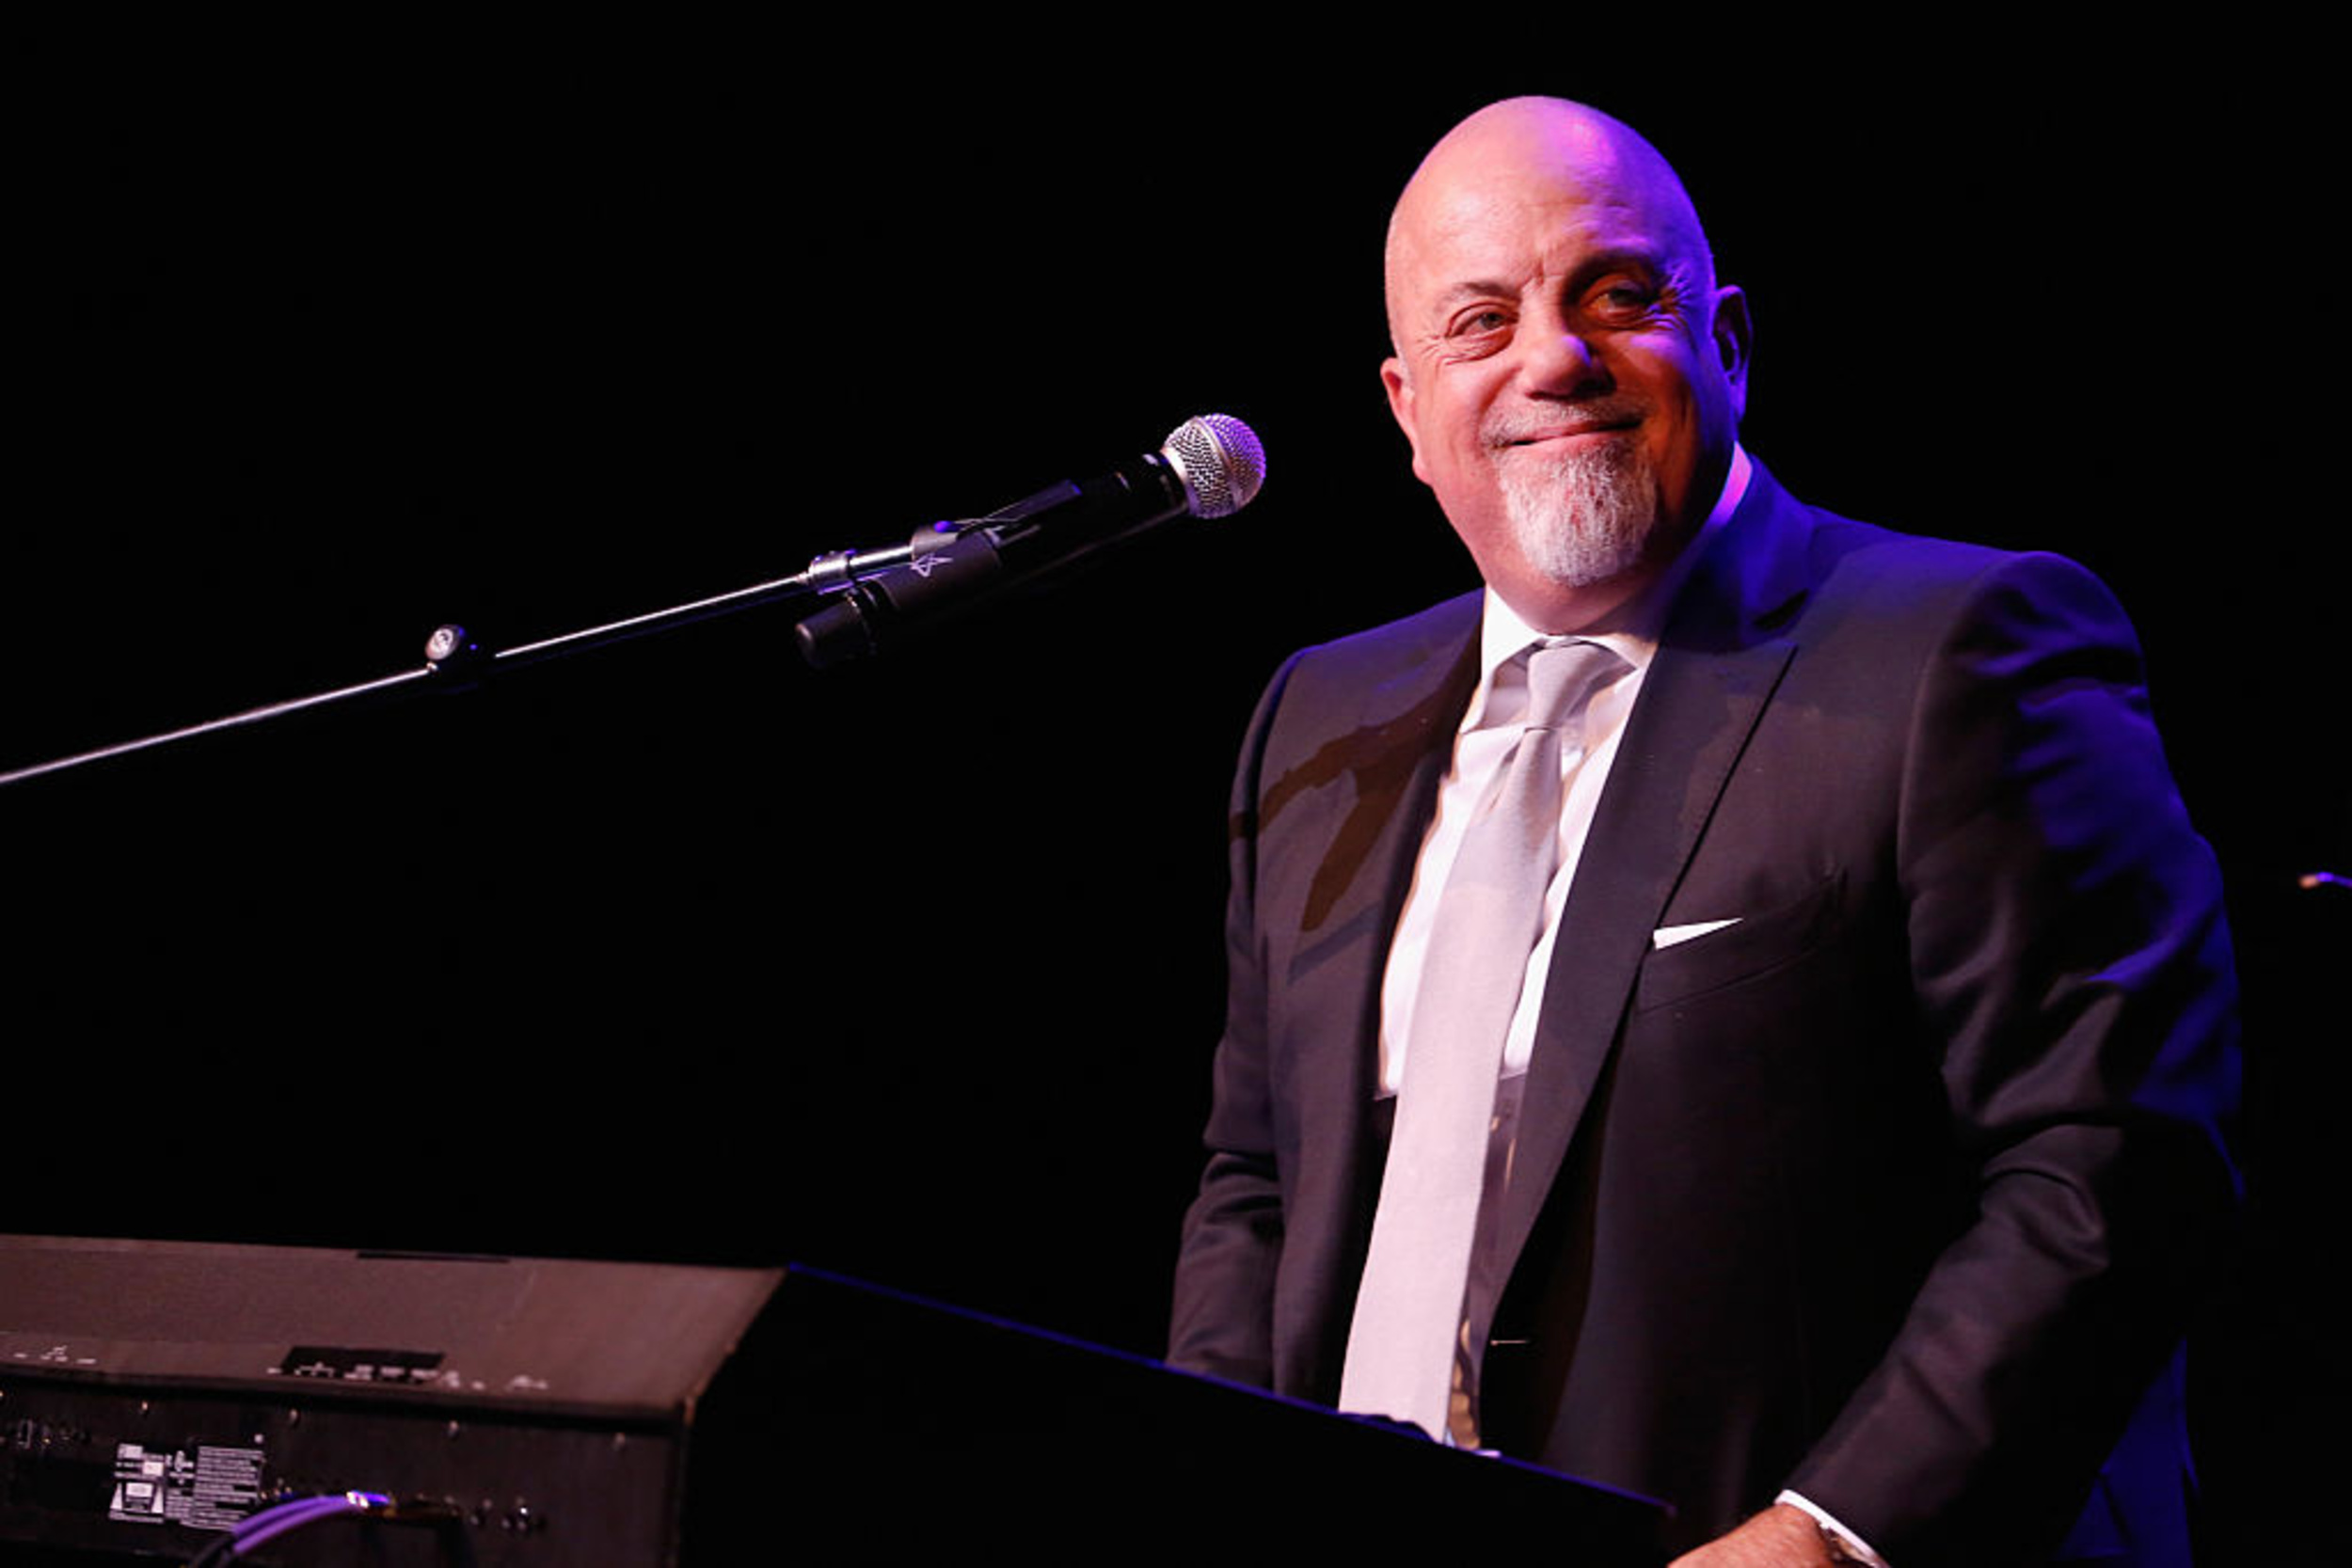 <p>While 2024 marks the end of Billy Joel’s long-running Madison Square Garden residency, he’s still taking his show on the road across several stadiums. For a few of the select shows, Joel will be joined by legendary acts Sting and Stevie Nicks. </p><p>You may also like: <a href='https://www.yardbarker.com/entertainment/articles/the_20_best_action_movies_led_by_women_031524/s1__38969731'>The 20 best action movies led by women</a></p>